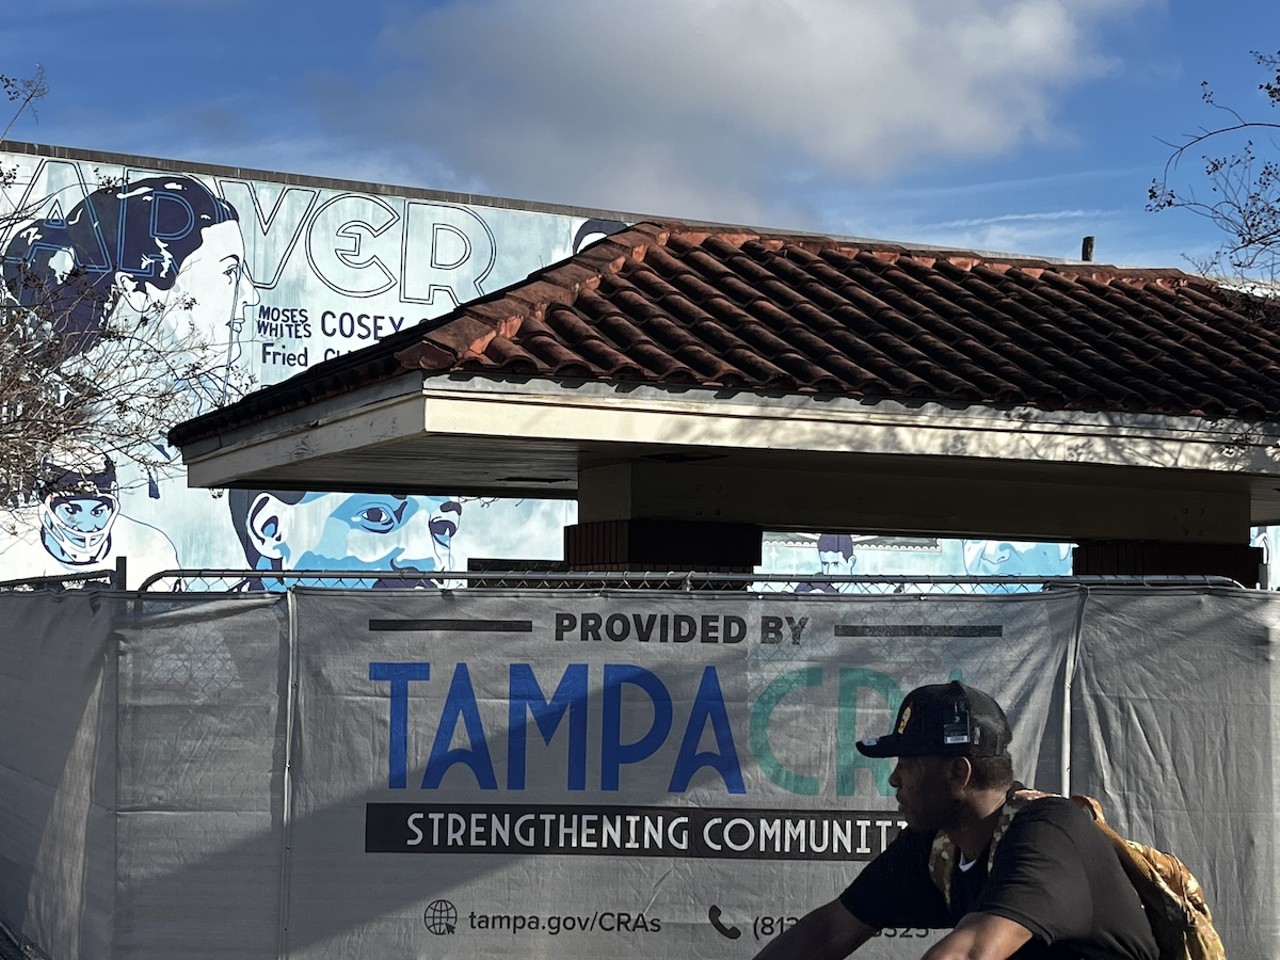 West Tampa’s CRA has nearly-$20 million in its coffers. That money could go a long way toward improving the alleys, planting trees, low-cost loans to individual property owners for maintaining their historic facades and eventually creating a community cultural center in the Centro Espanol.